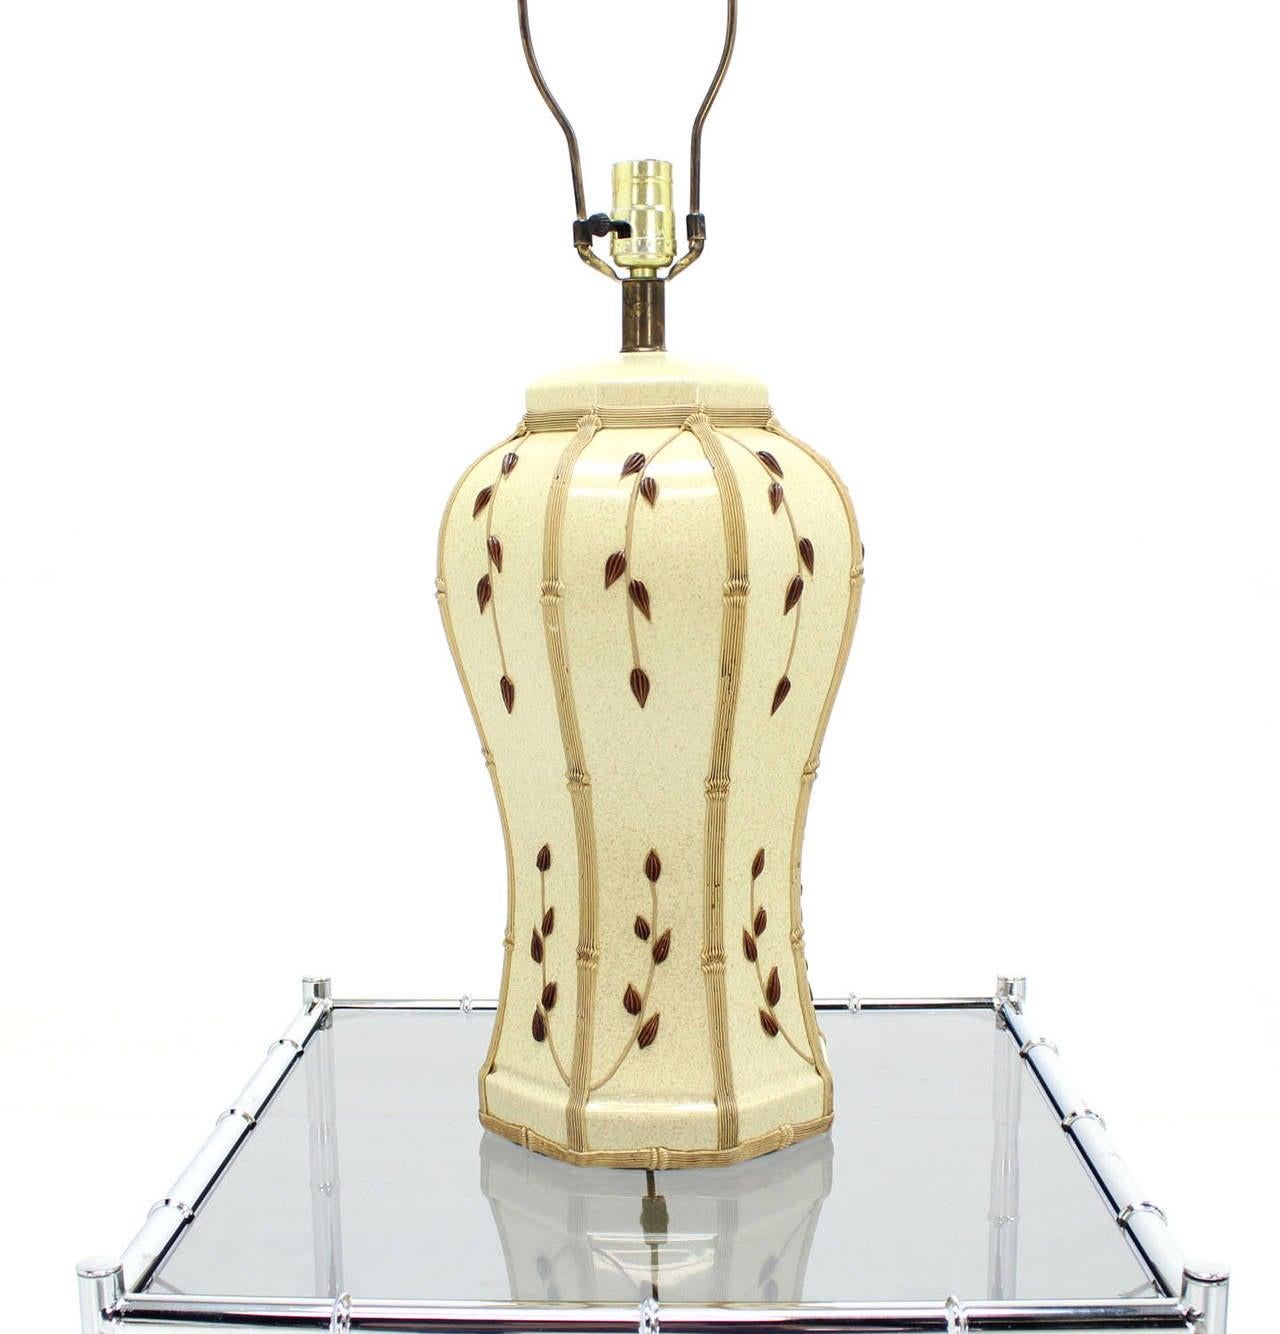 Faux Bamboo Motive Art Pottery Decorated Mid-Century Modern Ceramic Lamp MITN! For Sale 2